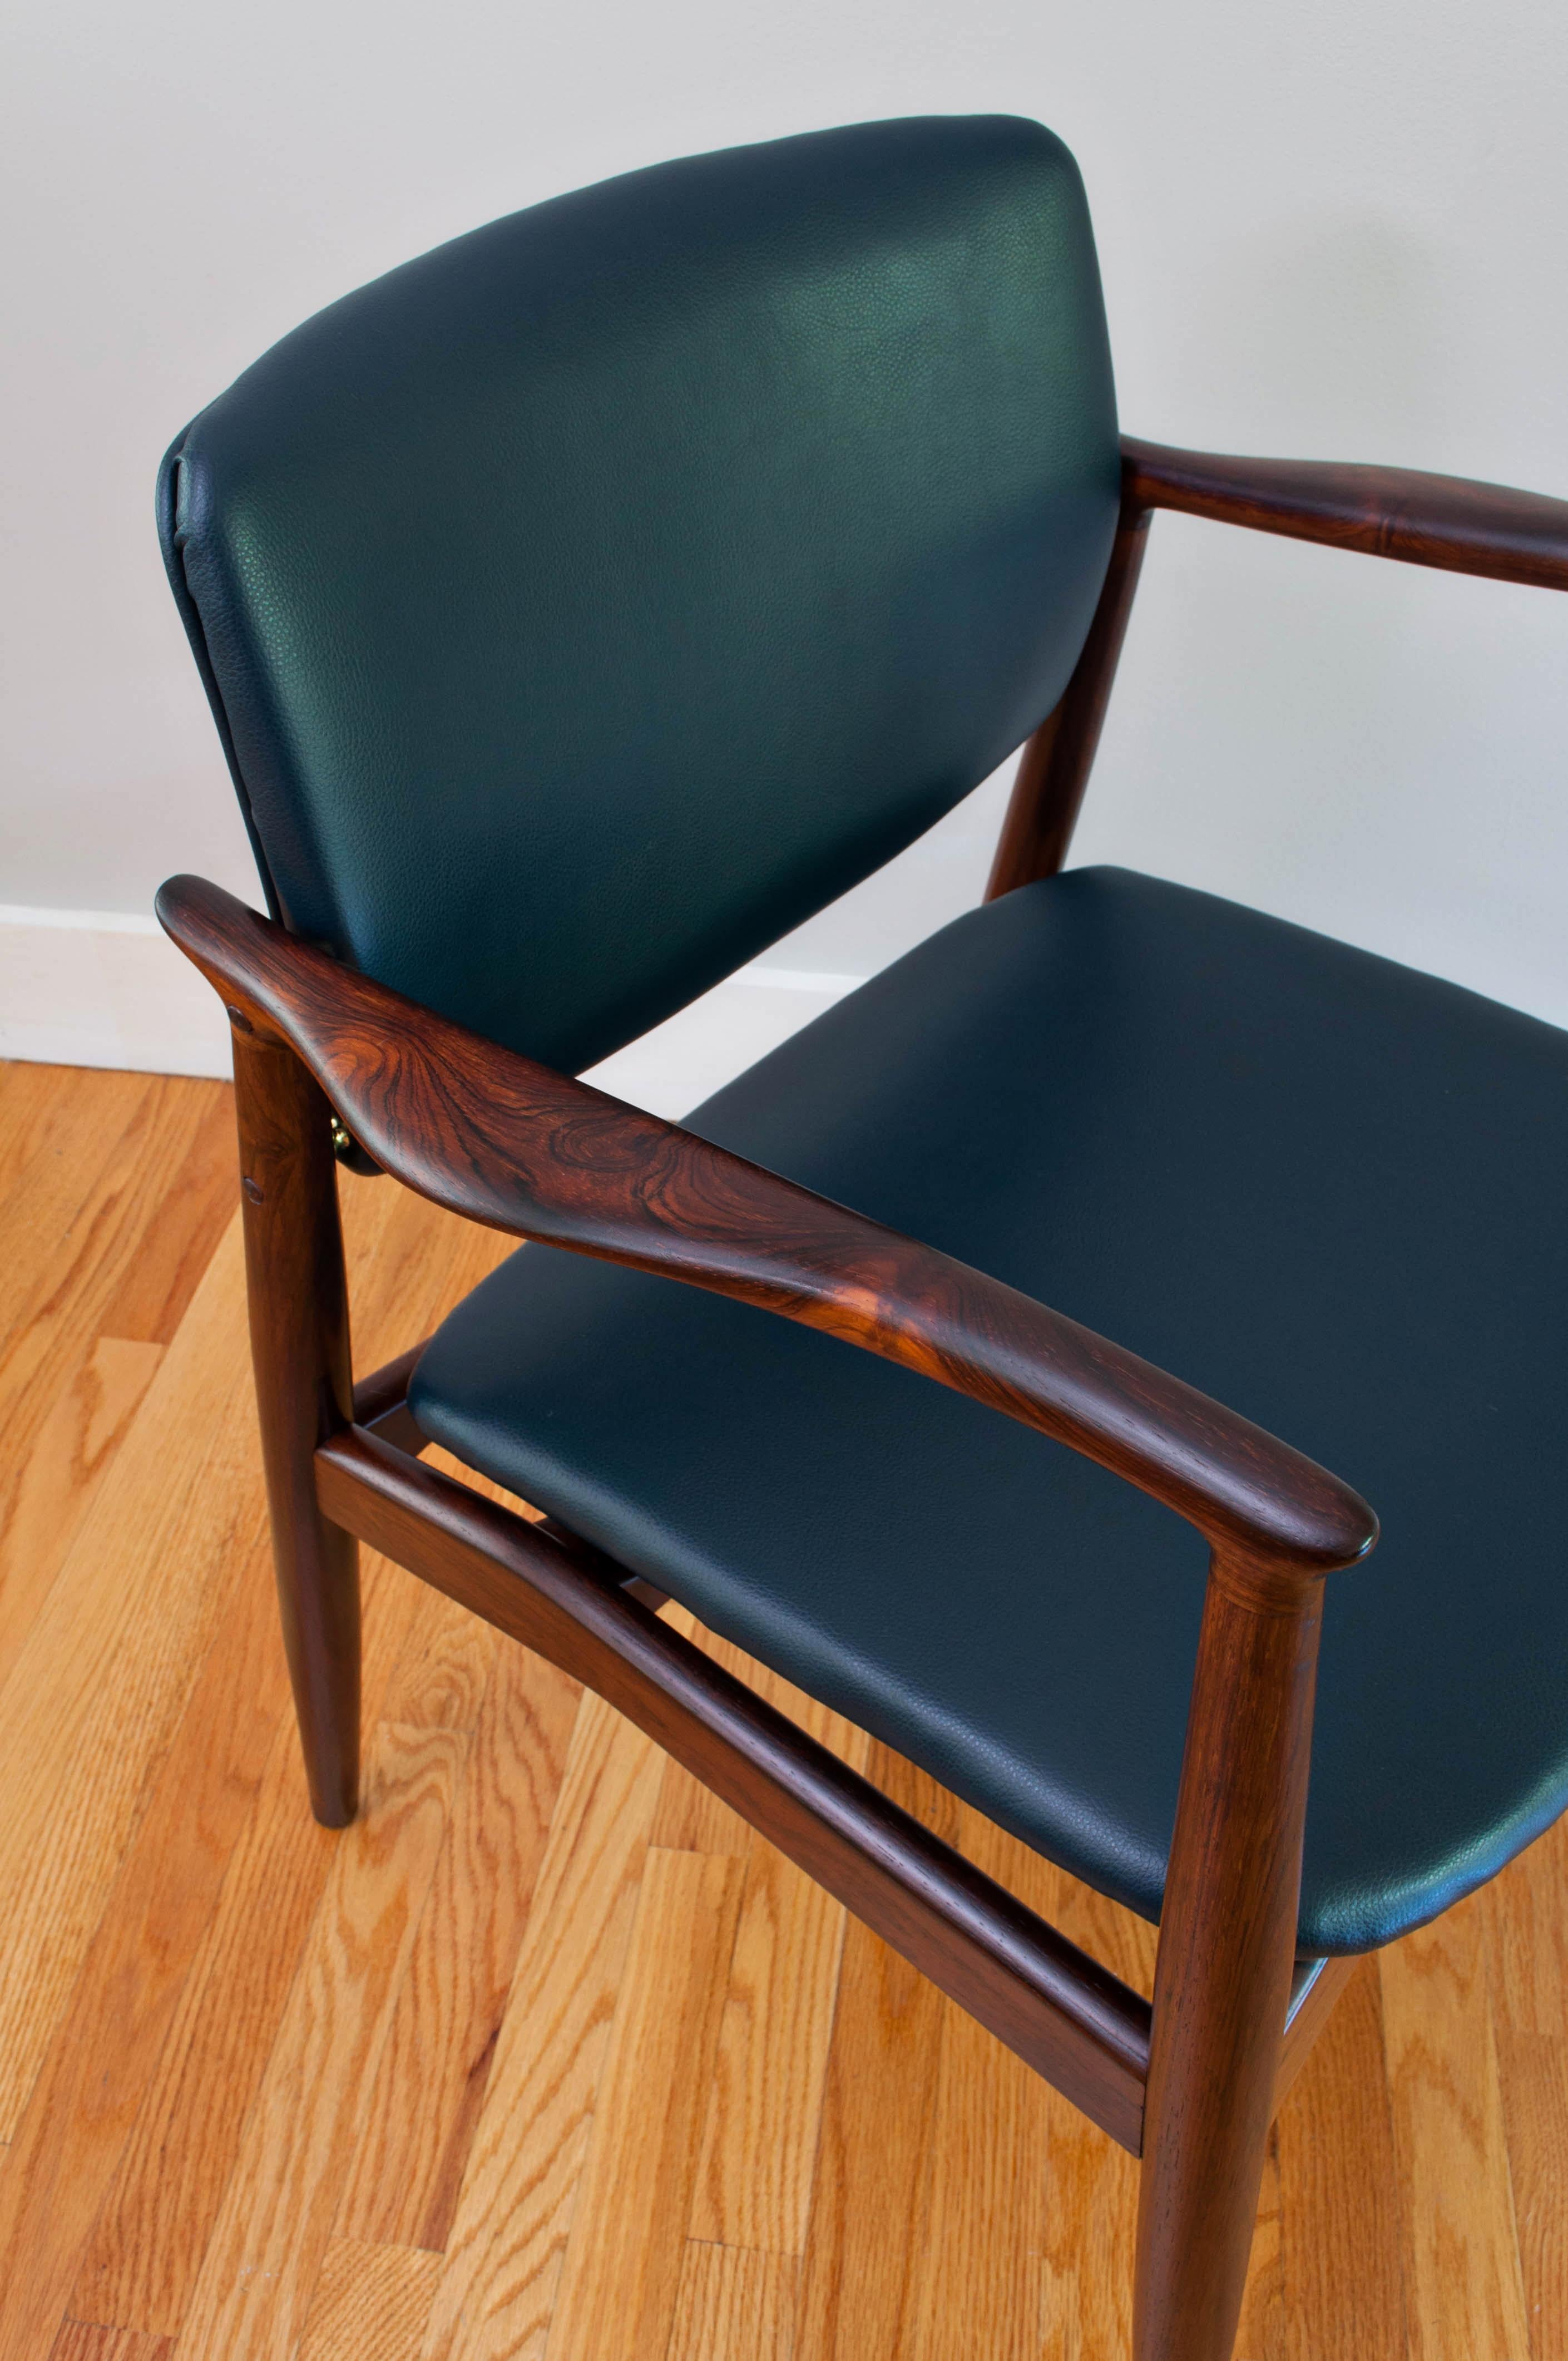 Very seldom seen Brazilian rosewood “Captains Chair” (model SJ 67) by Erik Buch and produced by R. Skovgaard Jensen of Ørum, Denmark. Recently restored with new rich blue faux leather upholstery and revived rosewood.